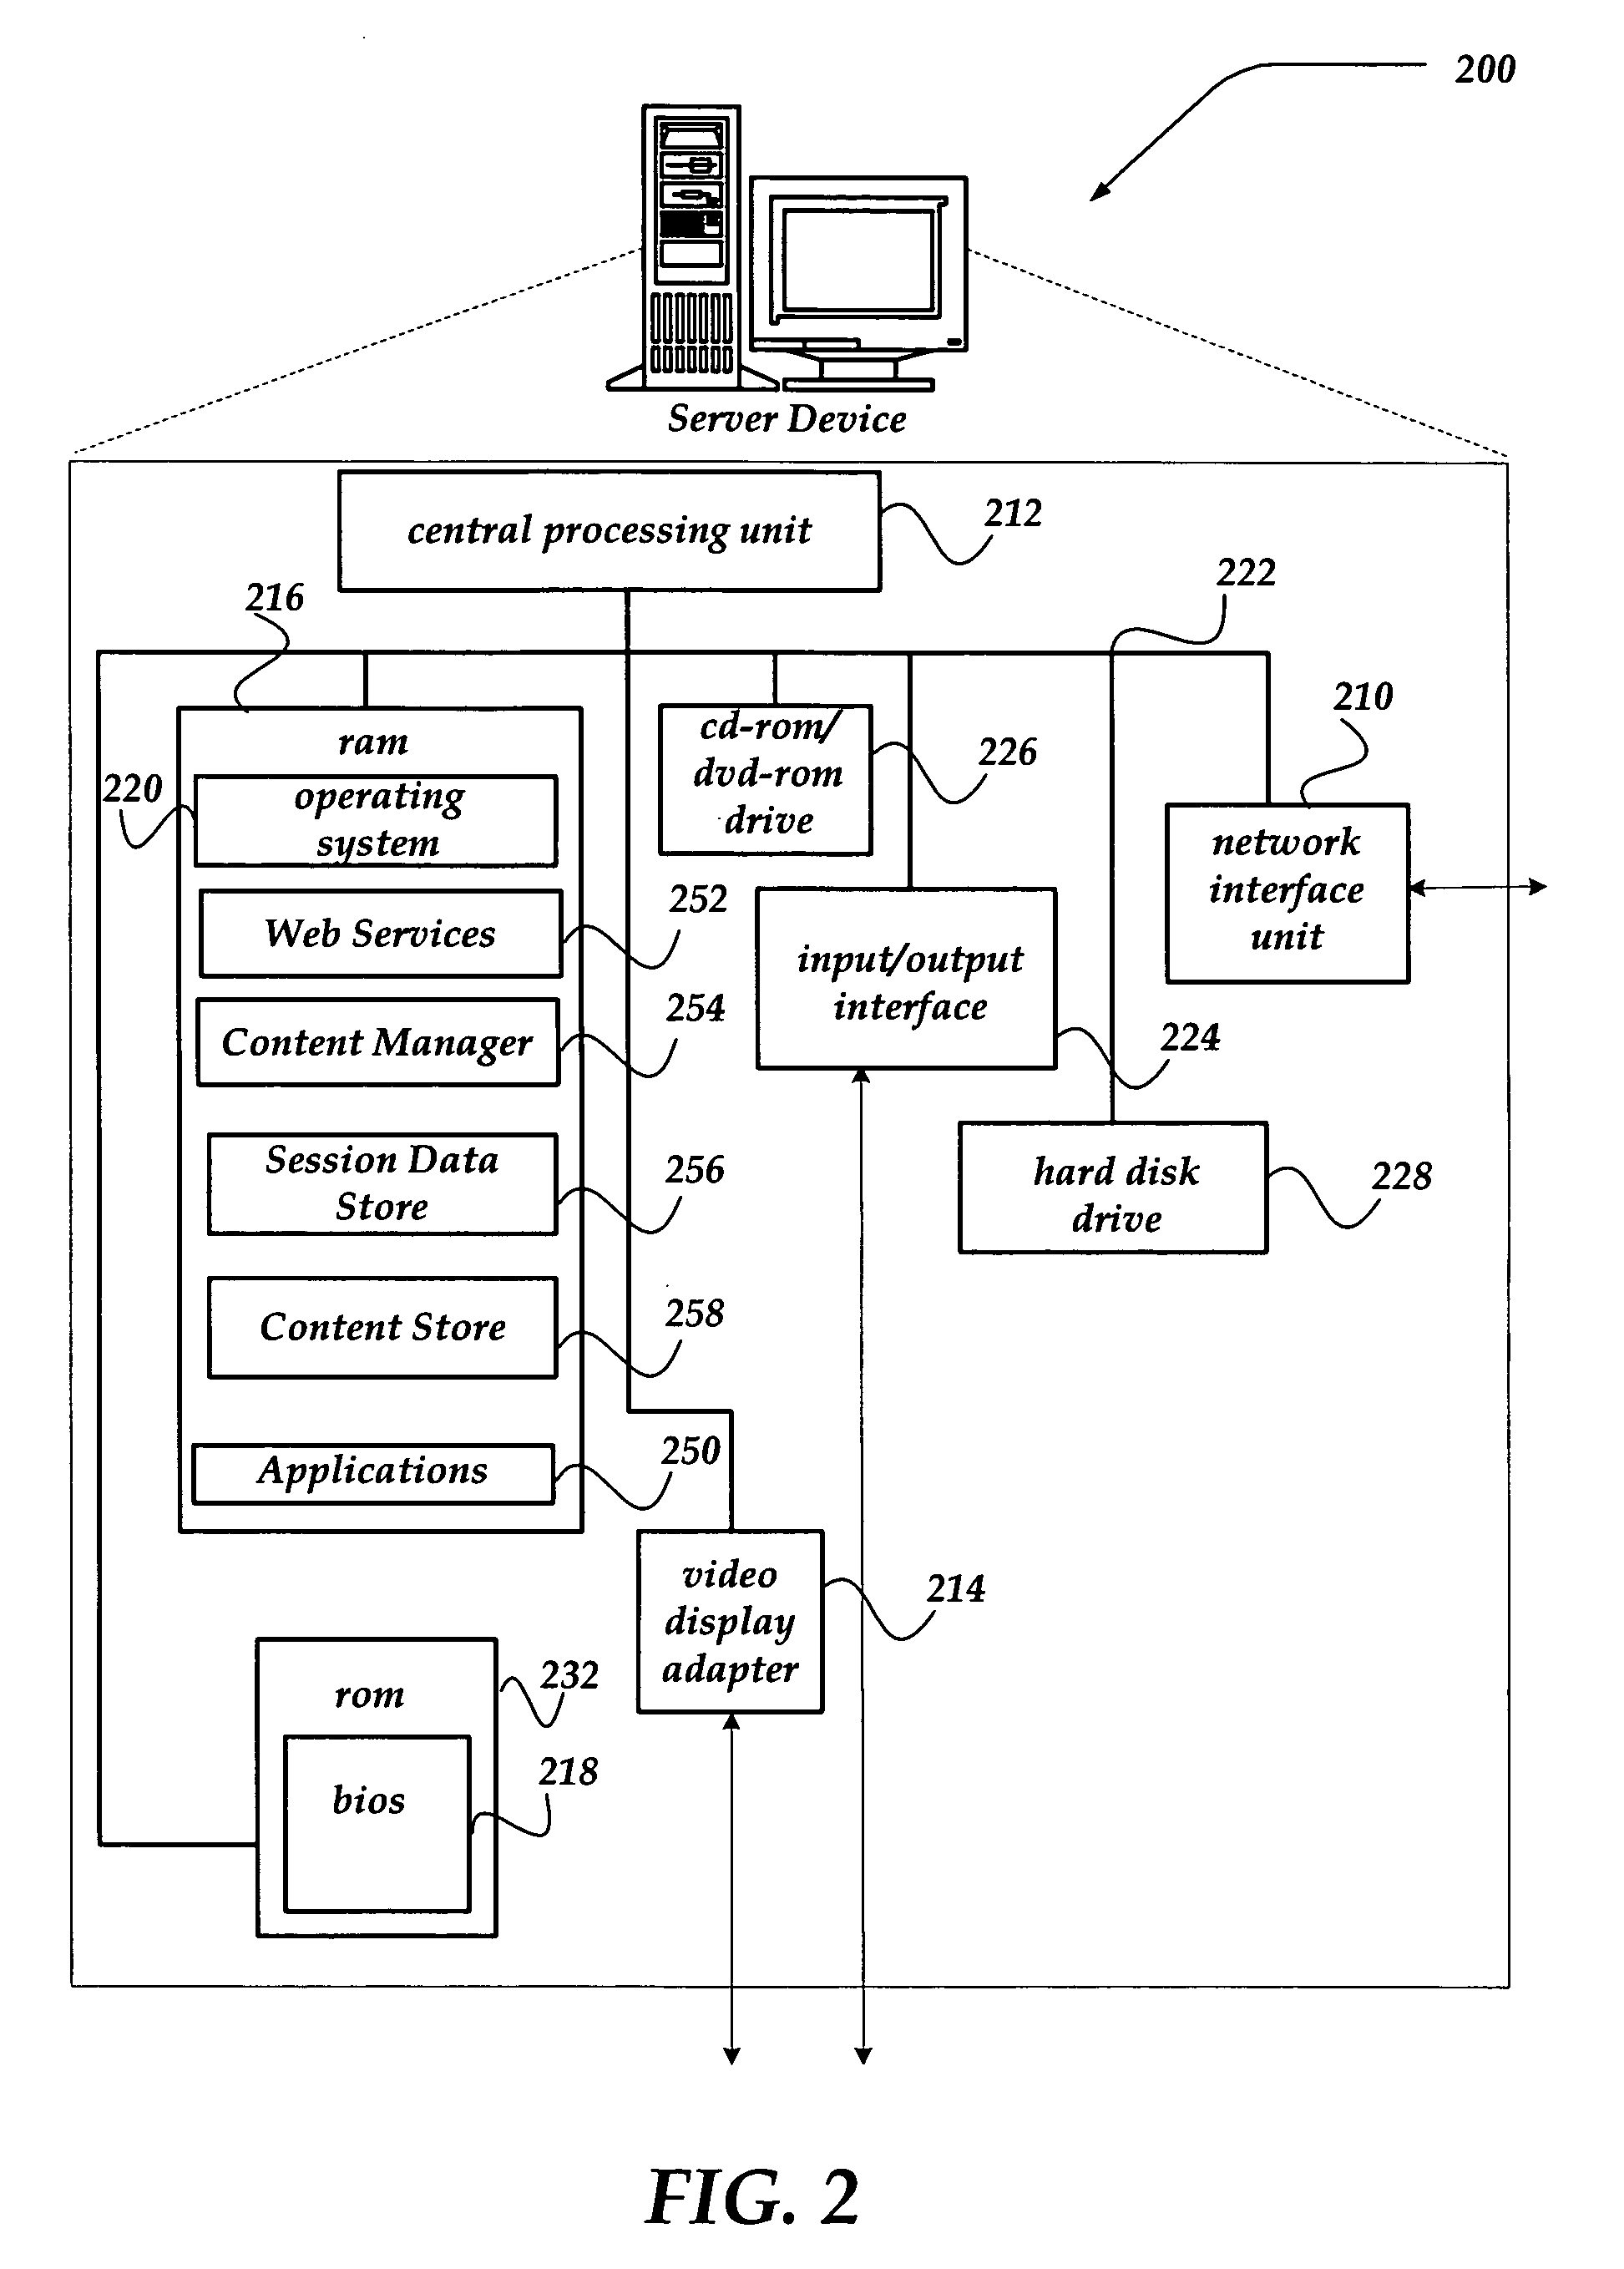 Session continuity for providing content to a remote device